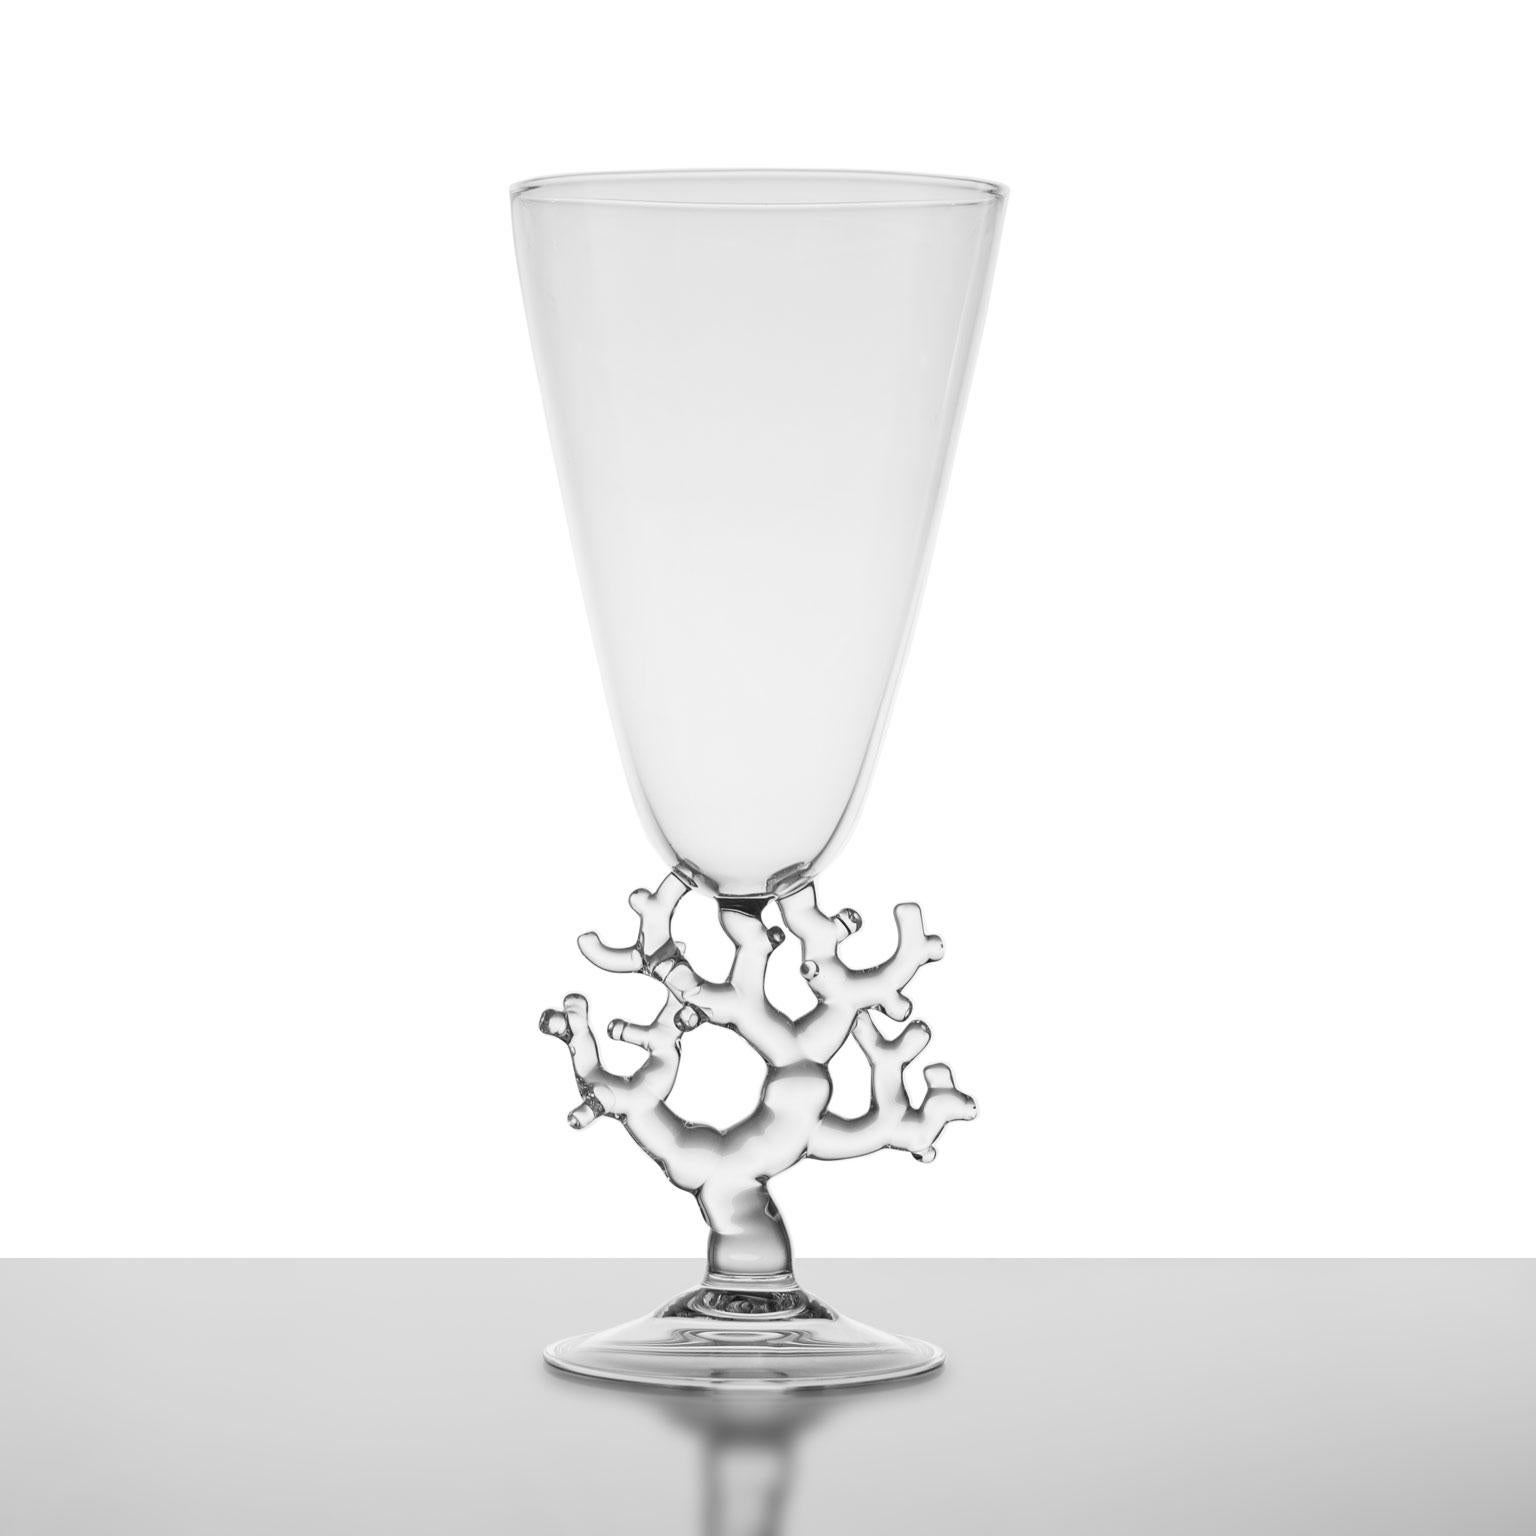 'Coral Vase'
A Hand-Blown Glass Vase by Simone Crestani

Coral Vase is one of the pieces from the Coral Collection.

